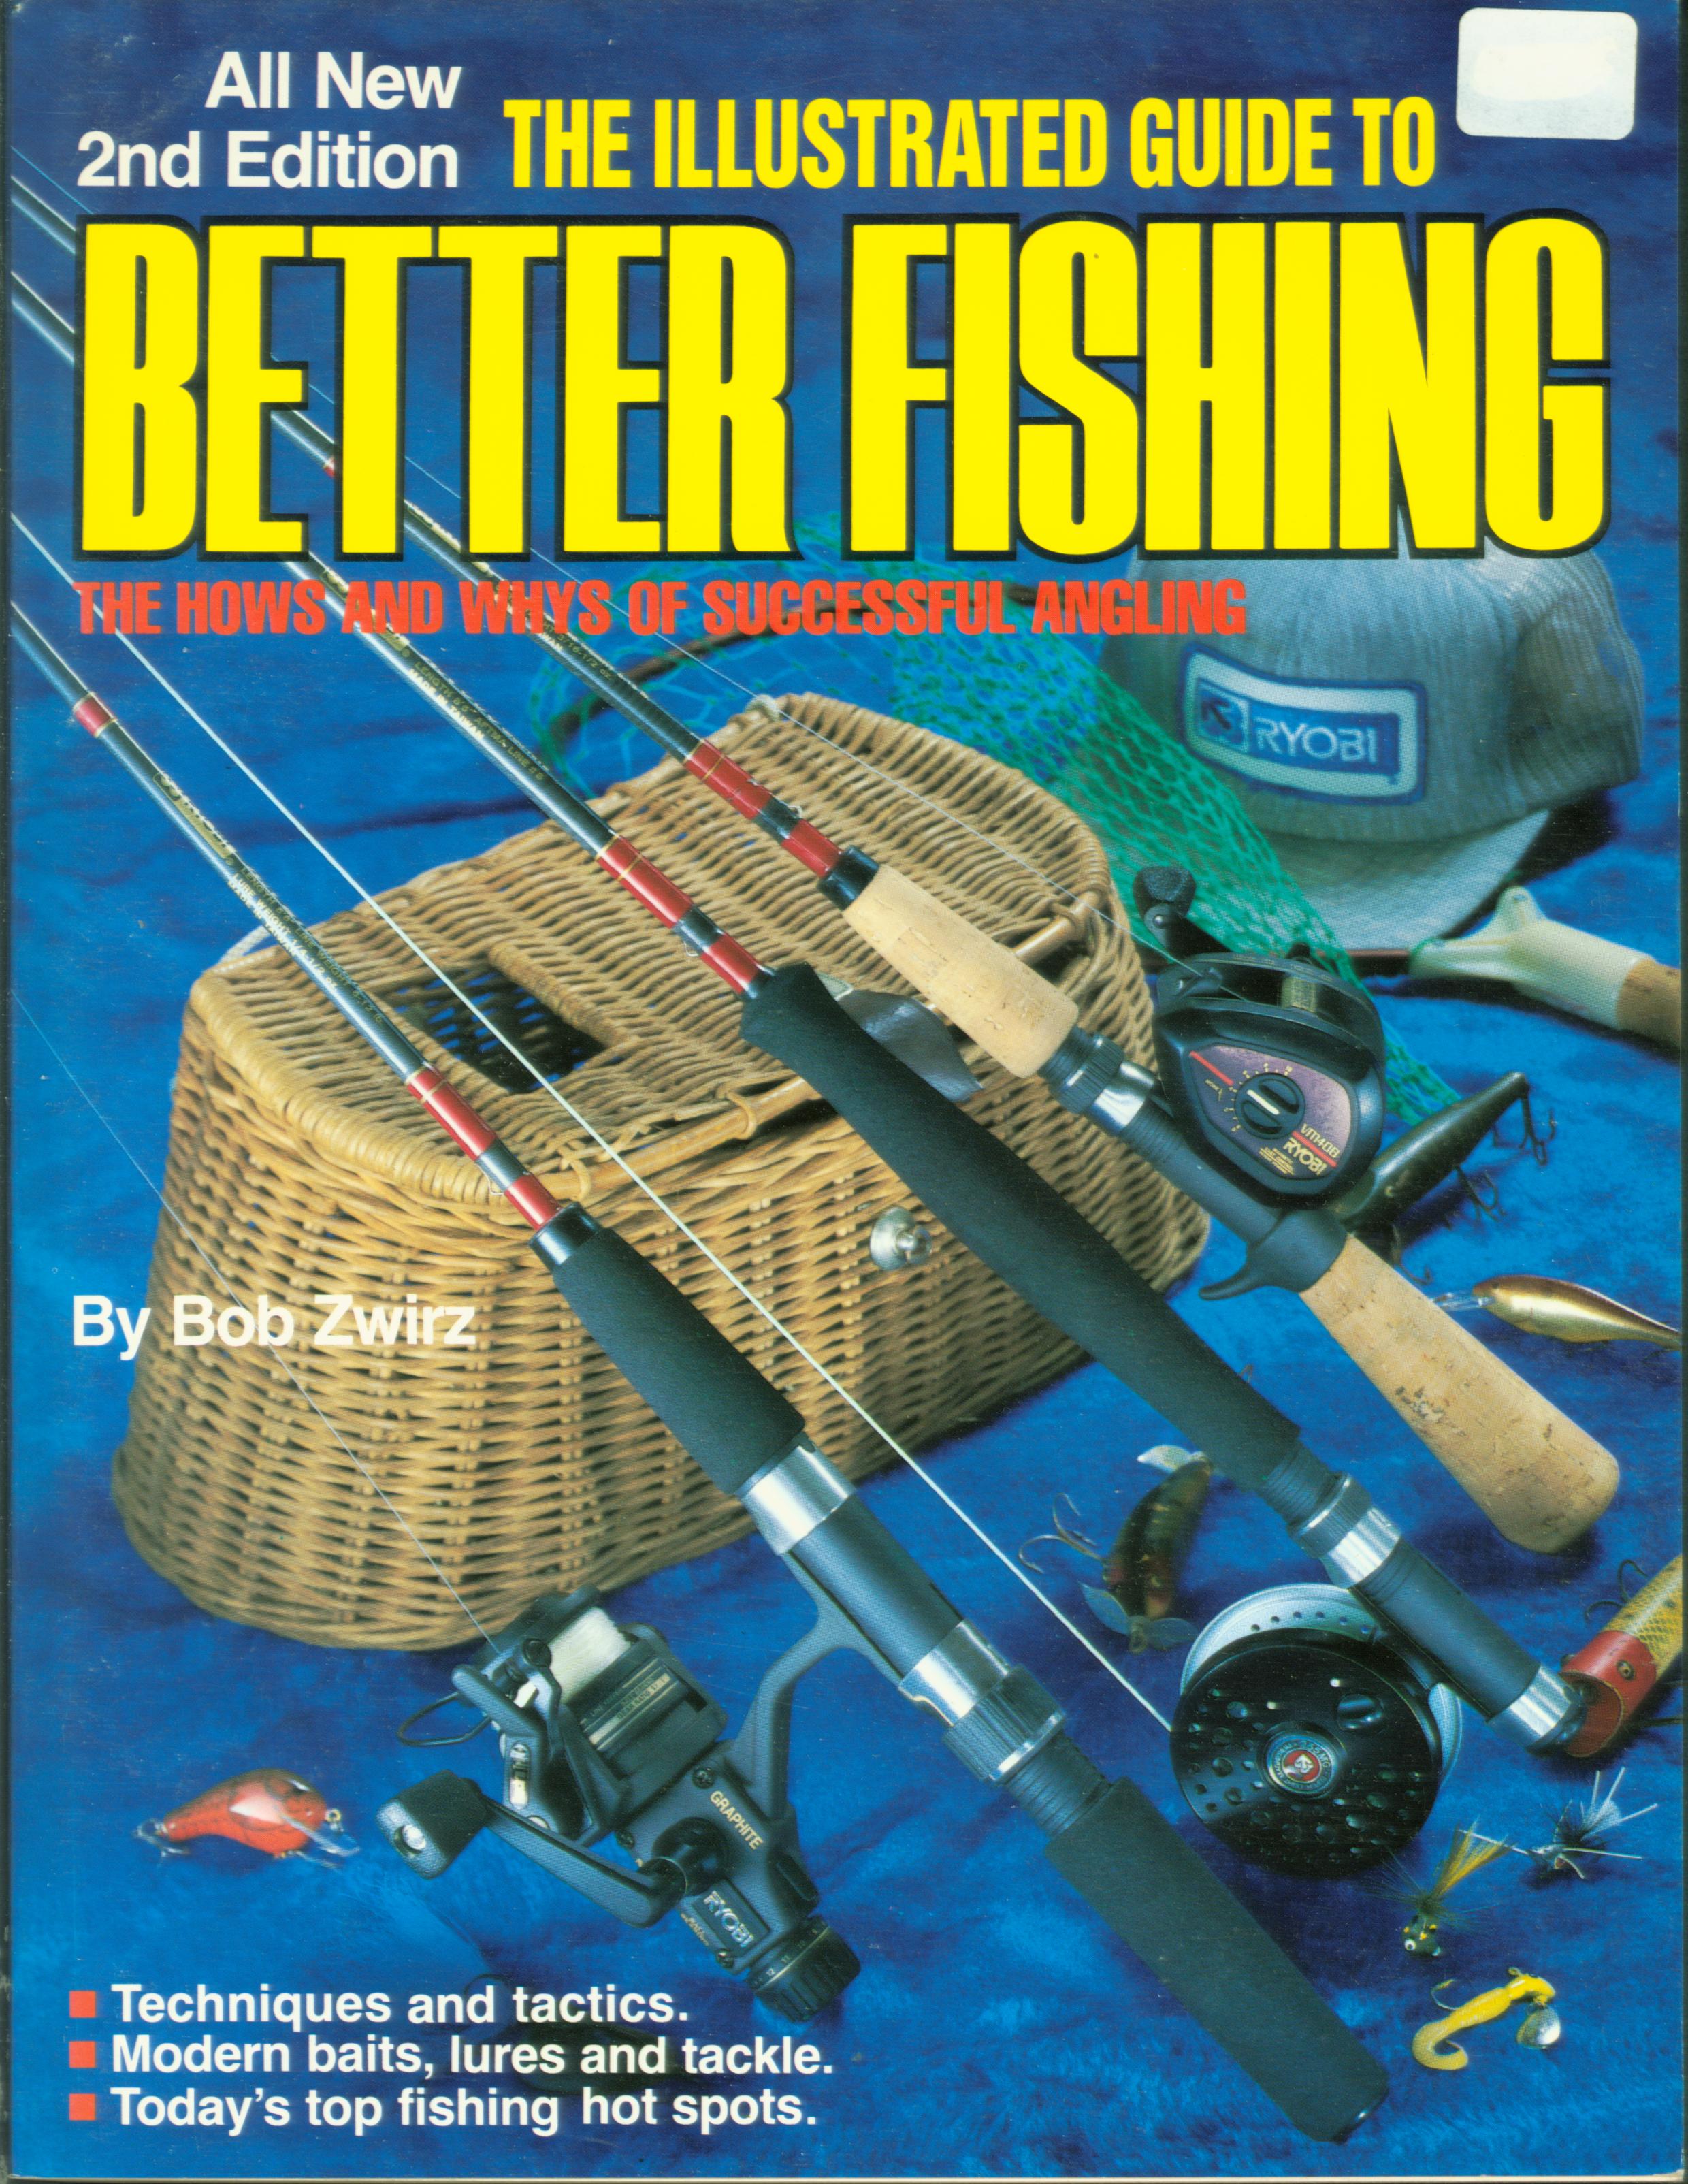 THE ILLUSTRATED GUIDE TO BETTER FISHING.